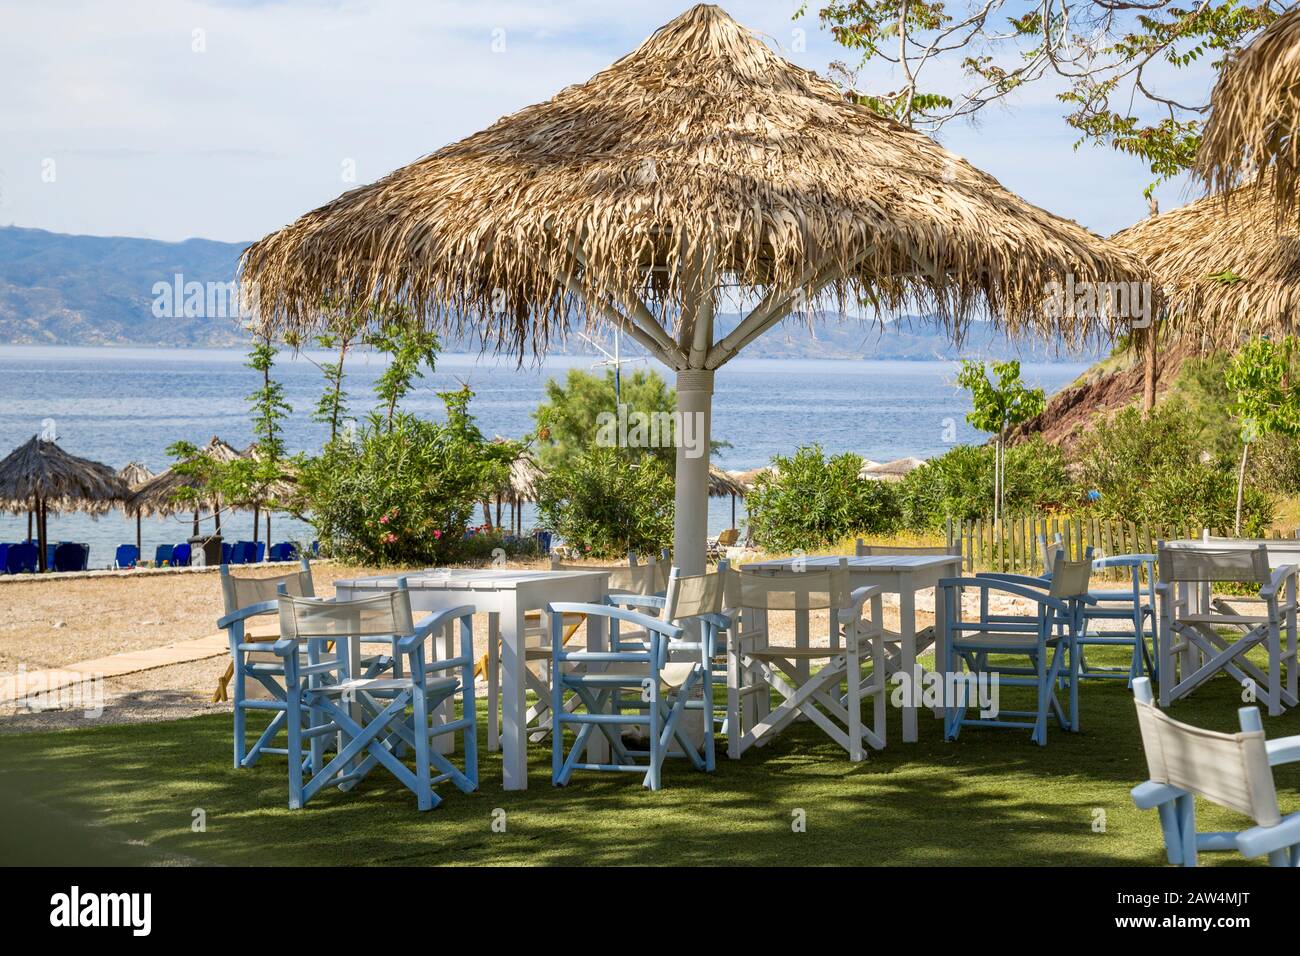 Palapa shading tables and chairs on Vlichos beach on Hydra Island, one of the Saronic Islands in the Aegean Sea. Stock Photo